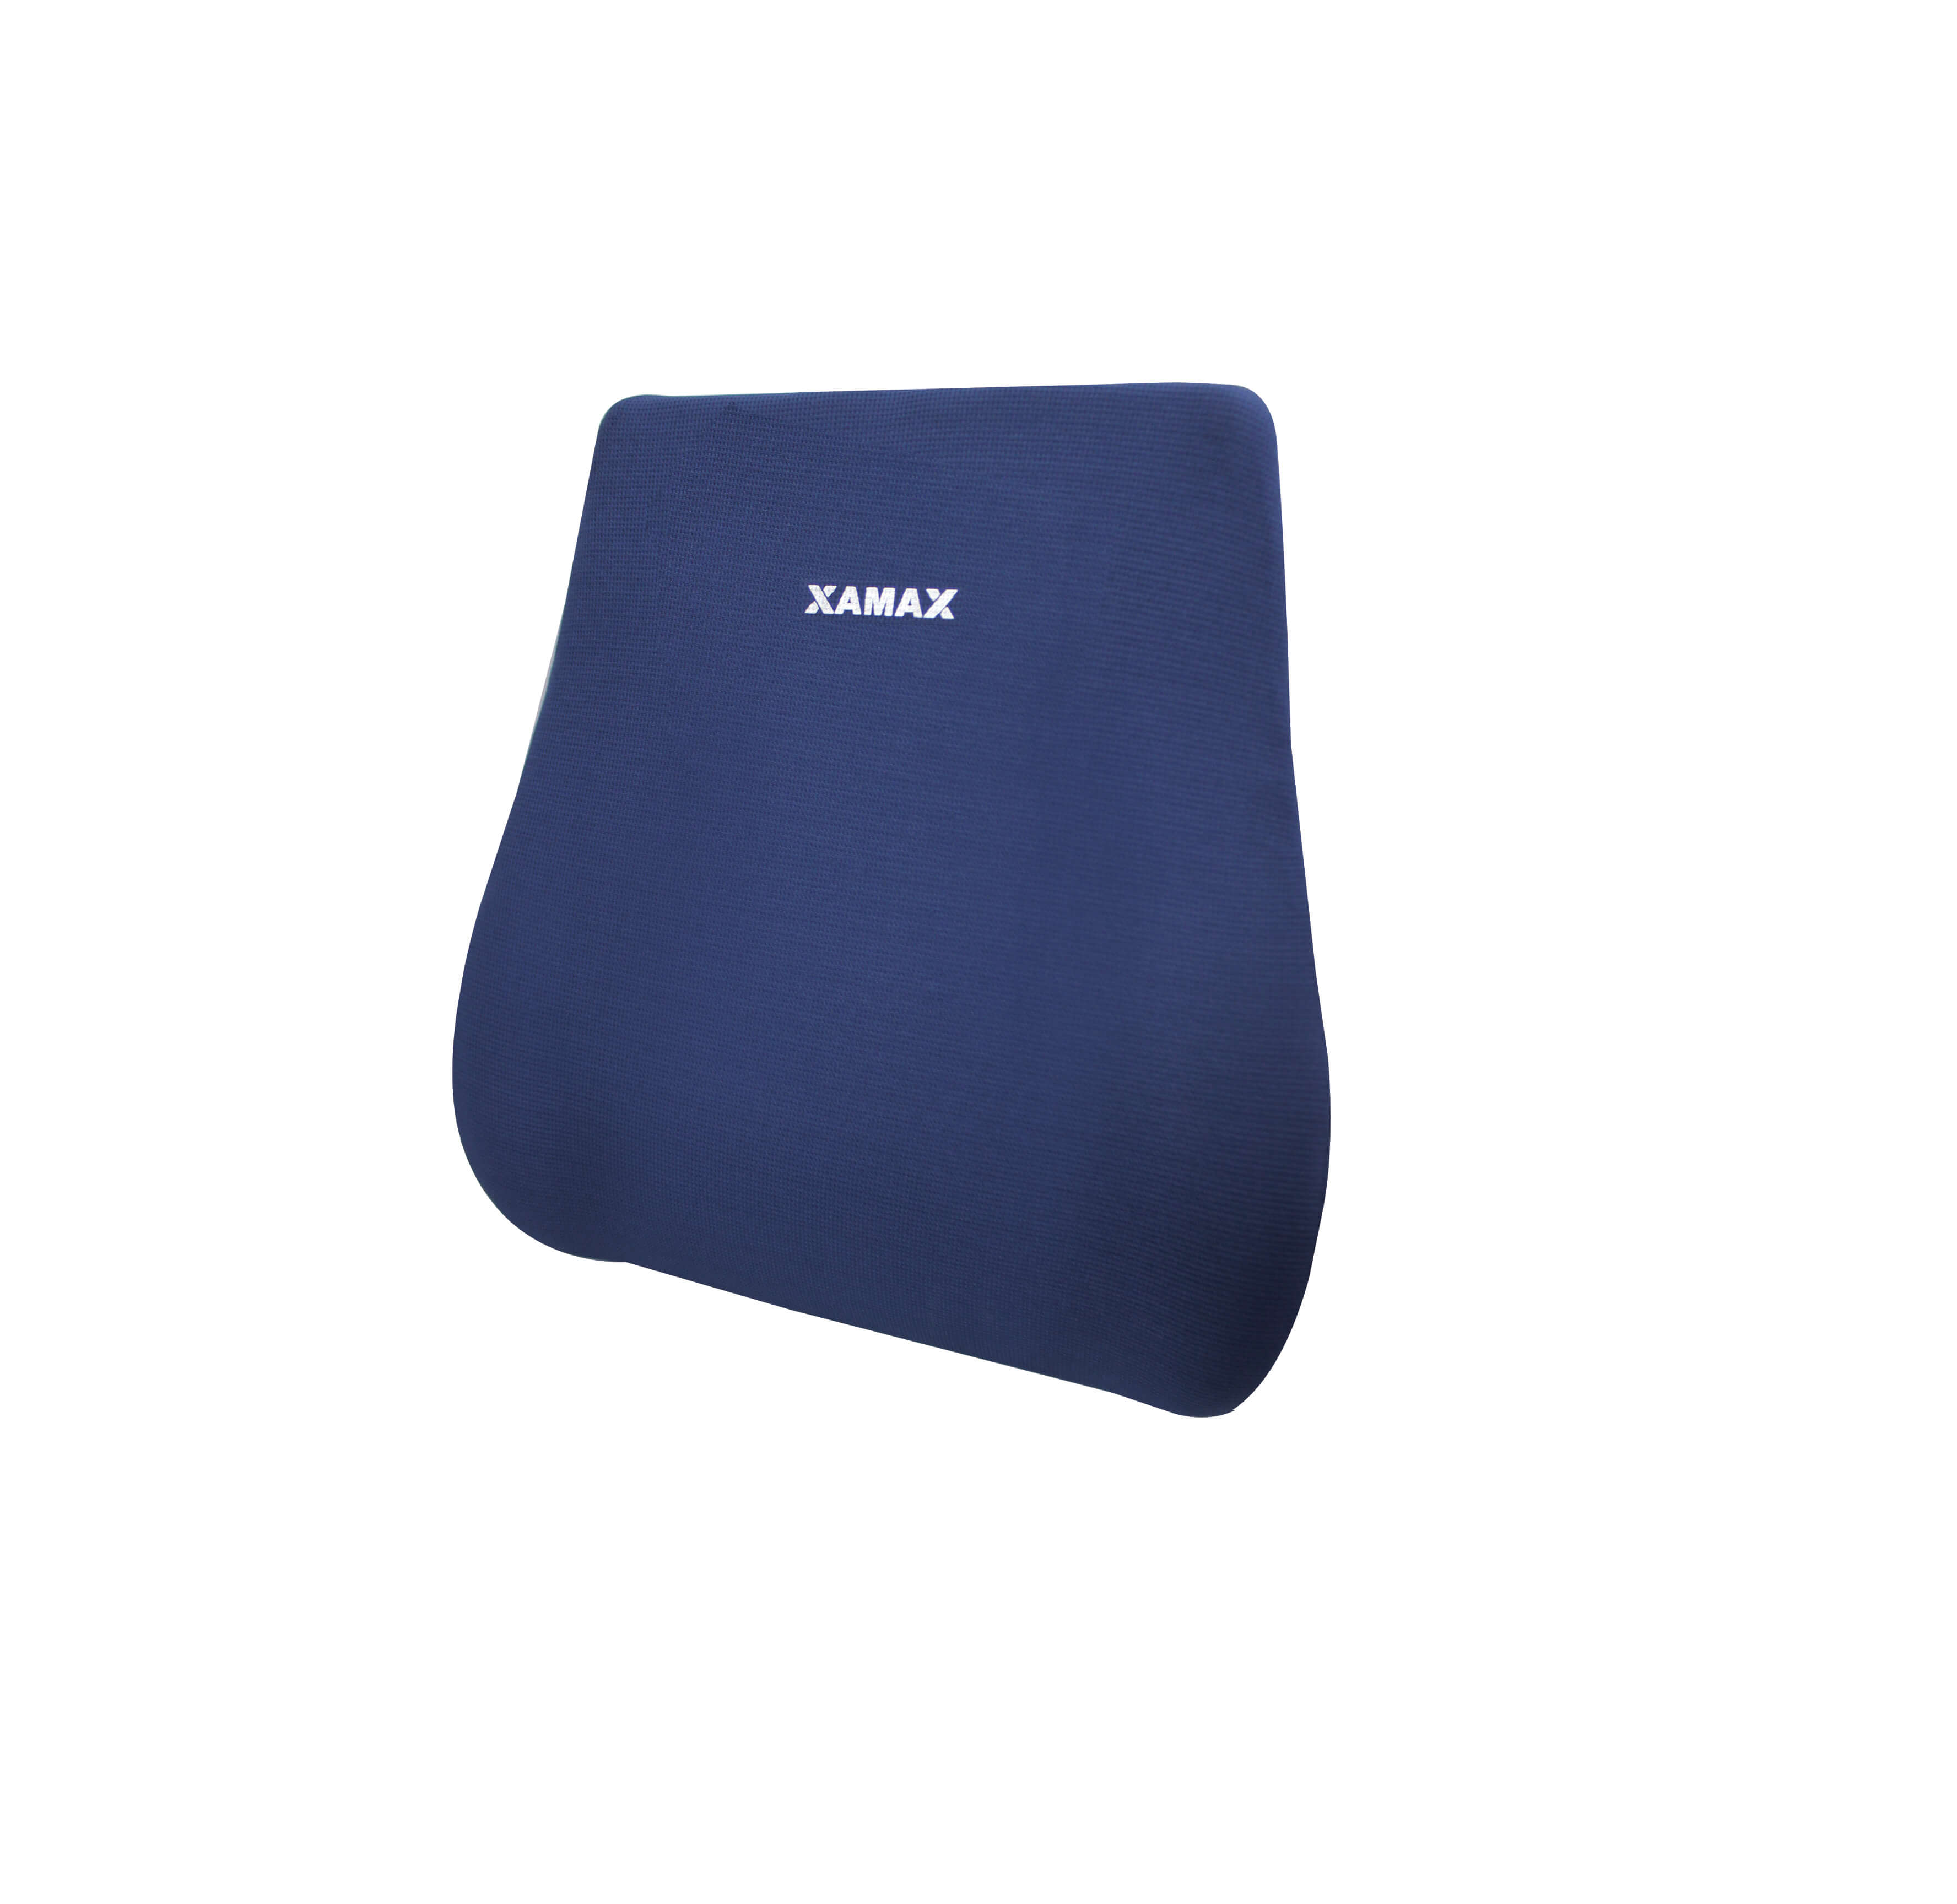 Xamax Pro F Backrest For Car Seat, Office Chair, And Computer Chair (Blue)